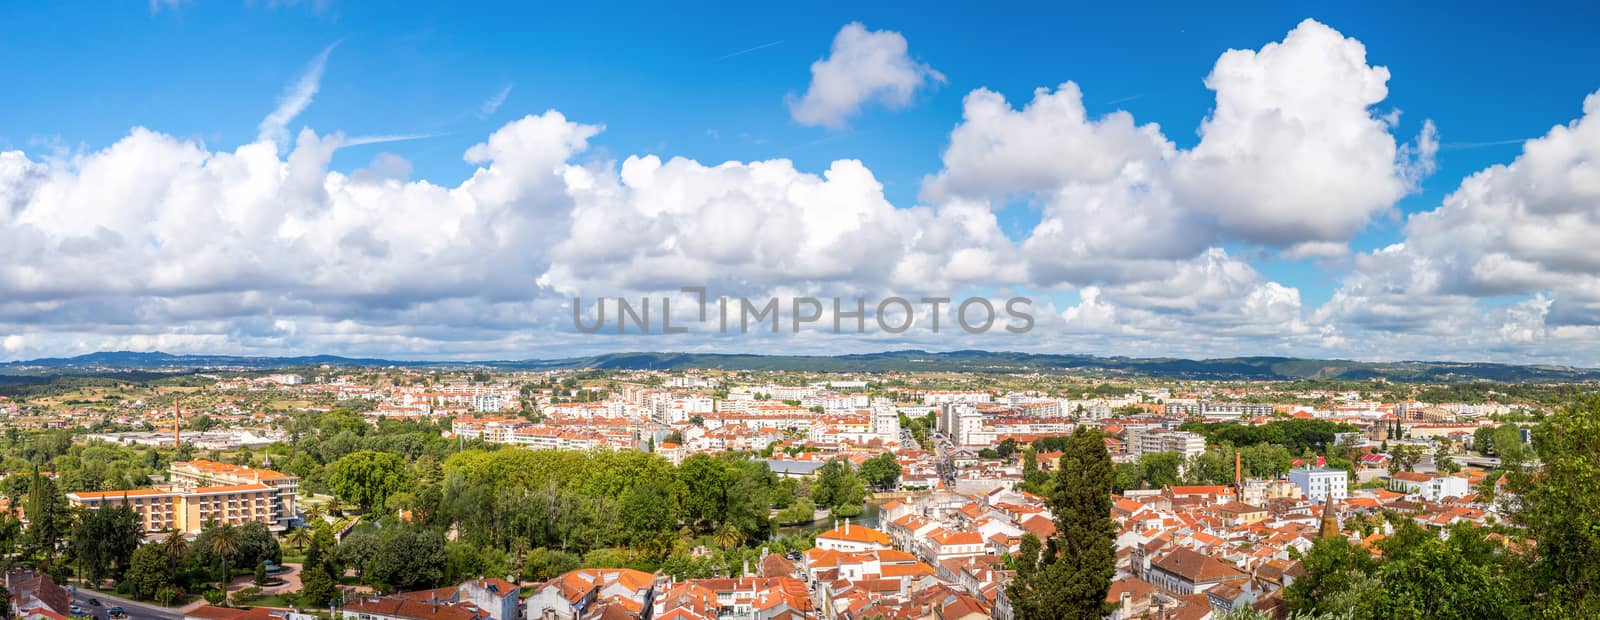 Tomar panorama Portugal by vichie81